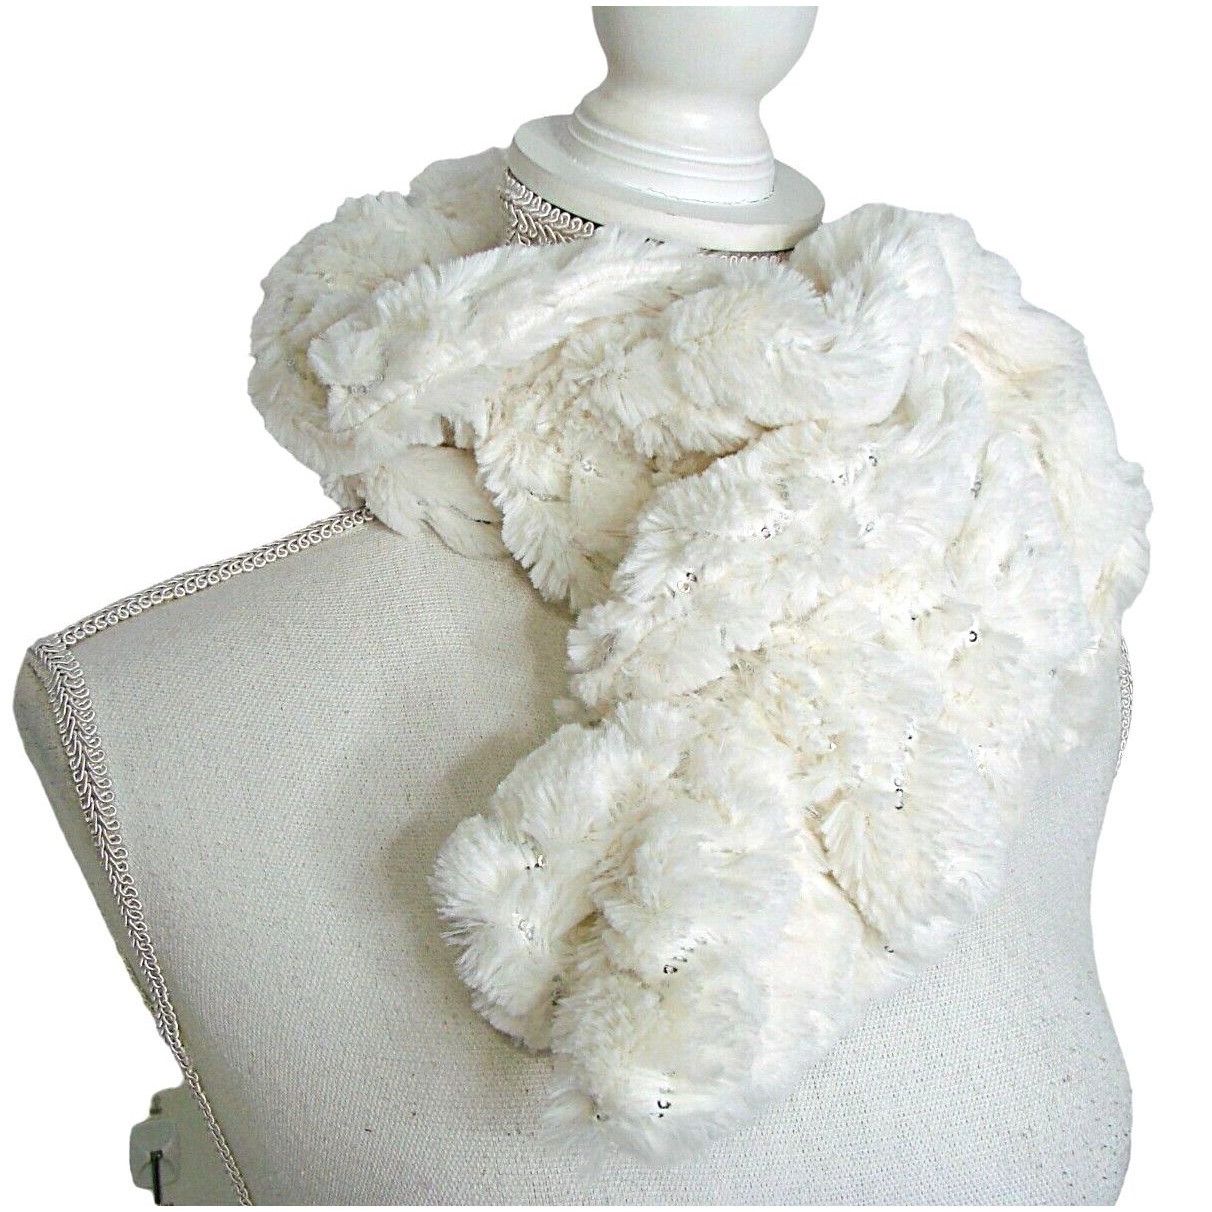 Other Faux Fur Stretchable Scarf Neck Warmer White Gold Sequin Pul ...